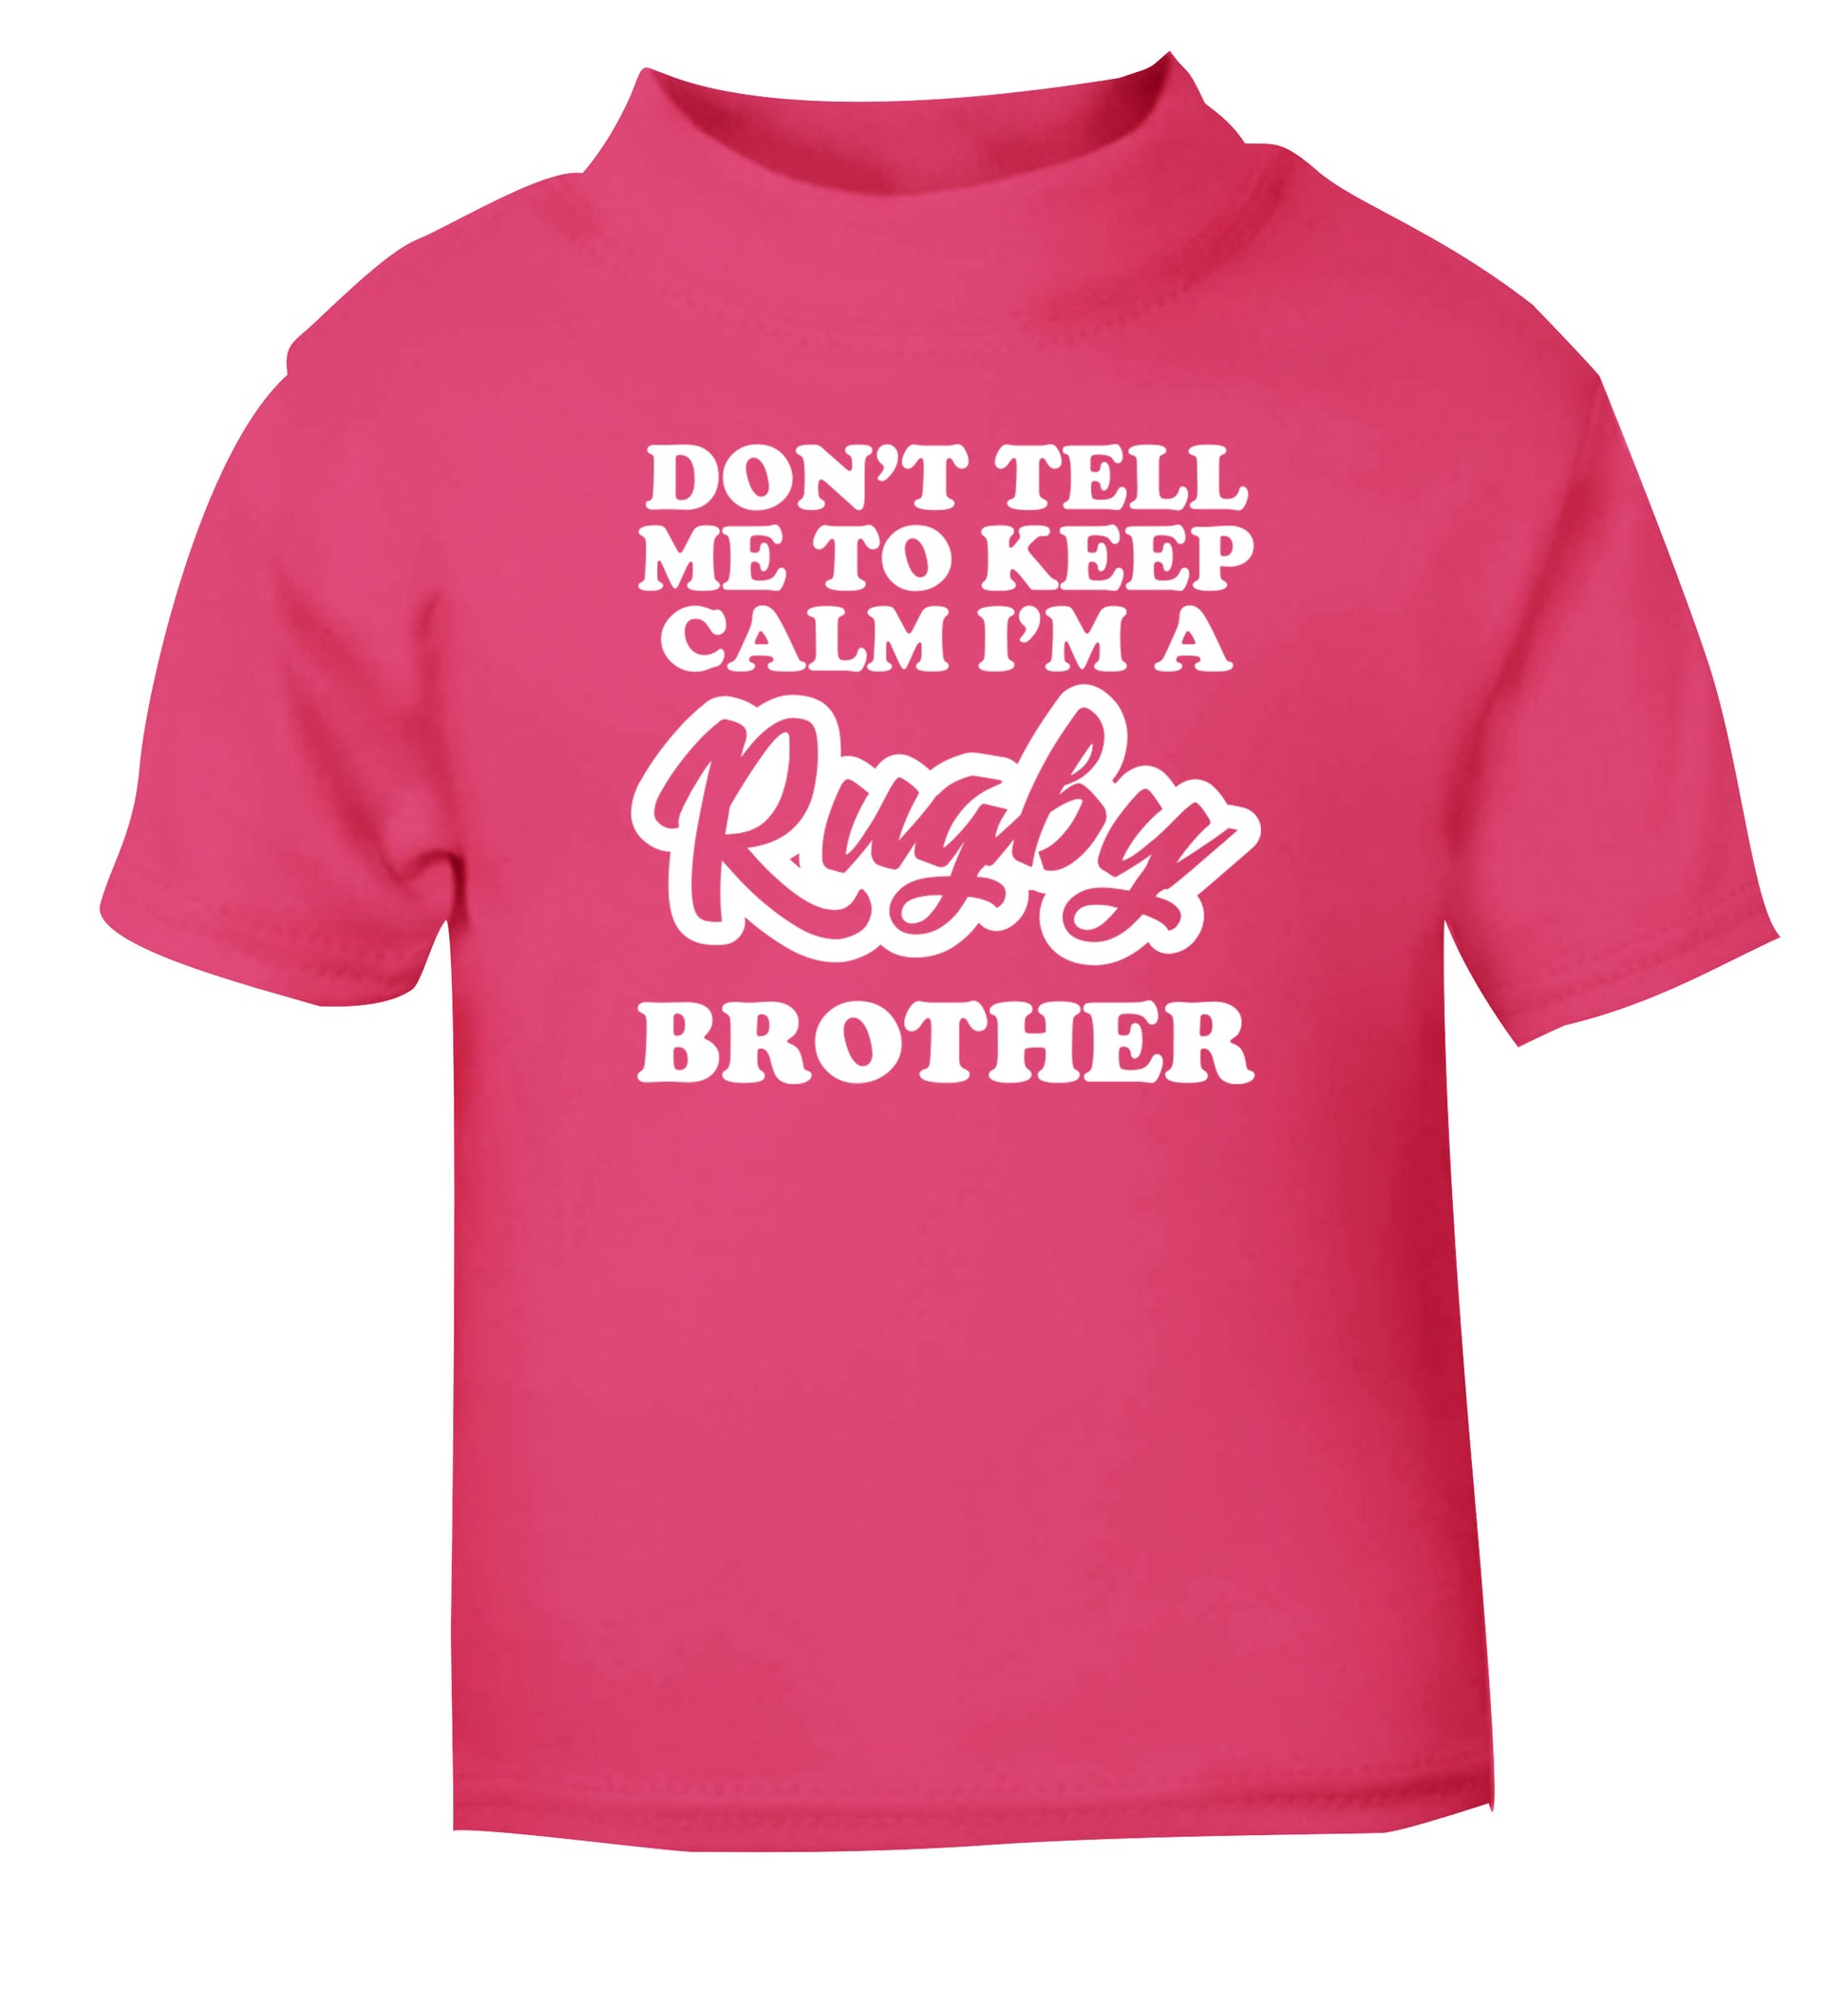 Don't tell me keep calm I'm a rugby brother pink Baby Toddler Tshirt 2 Years